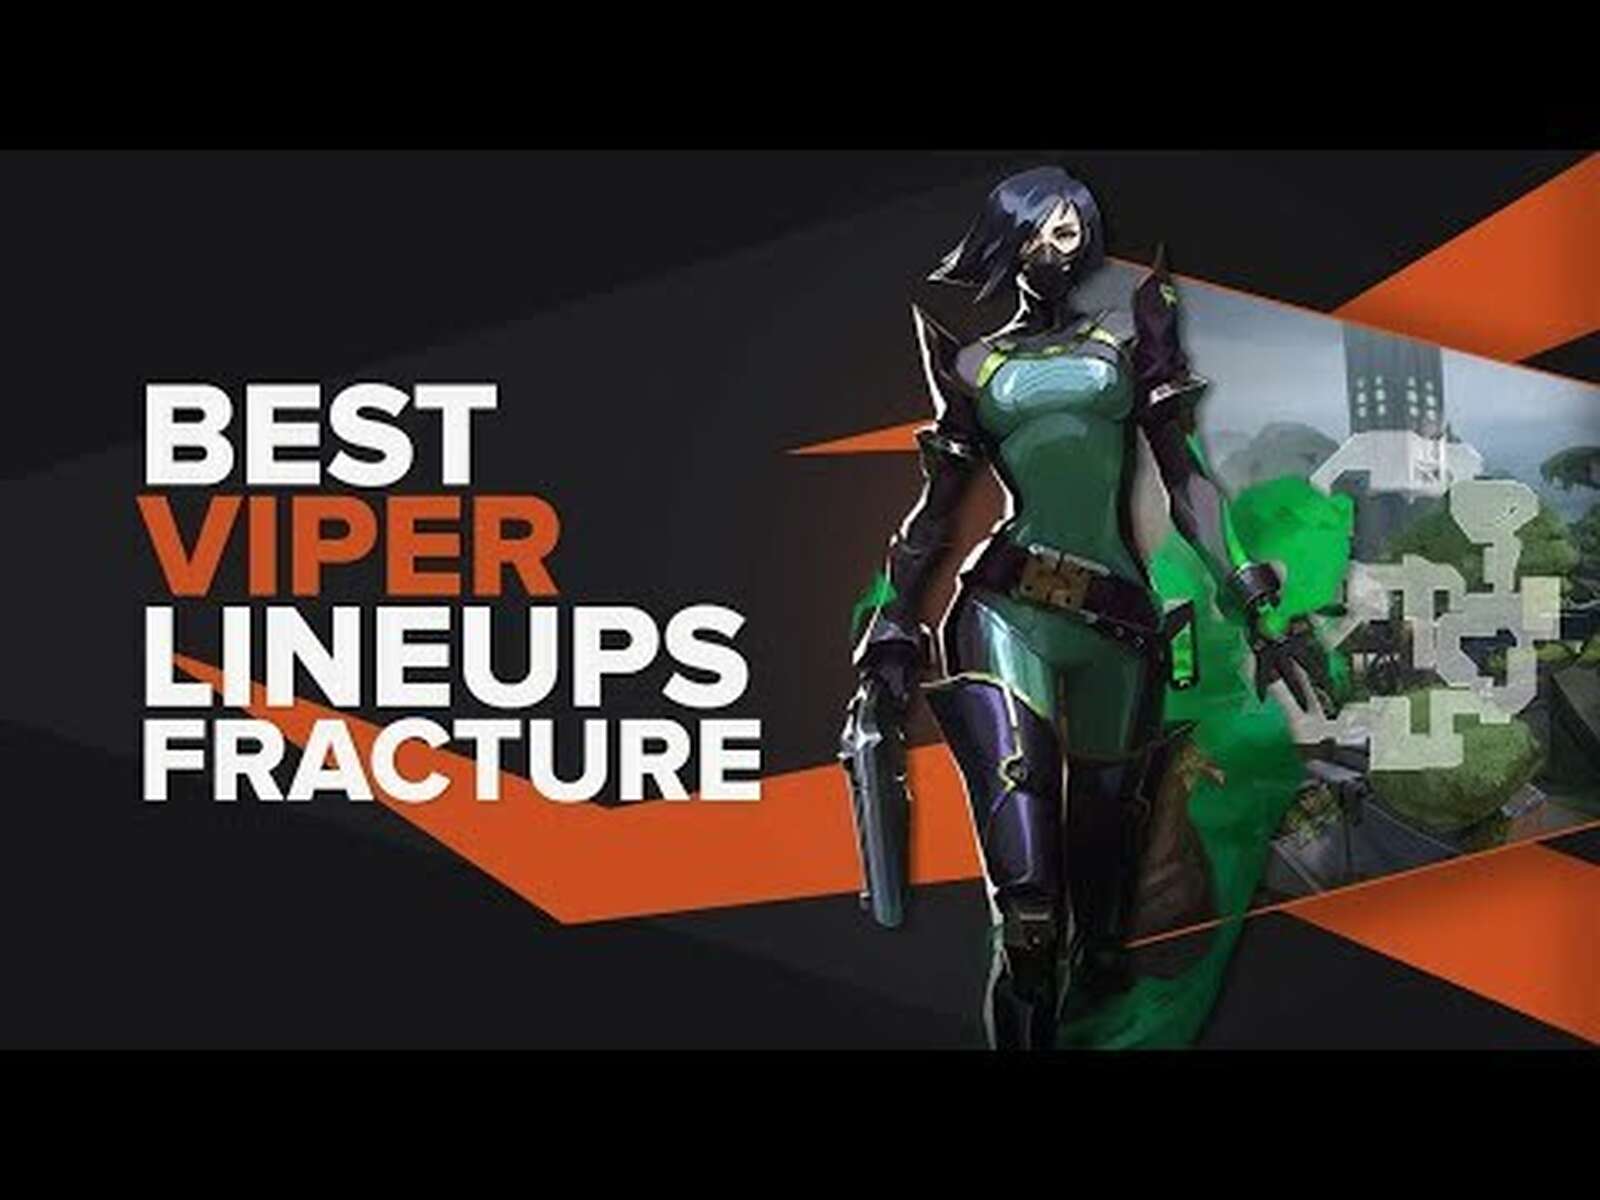 The Best Viper Lineups on Fracture